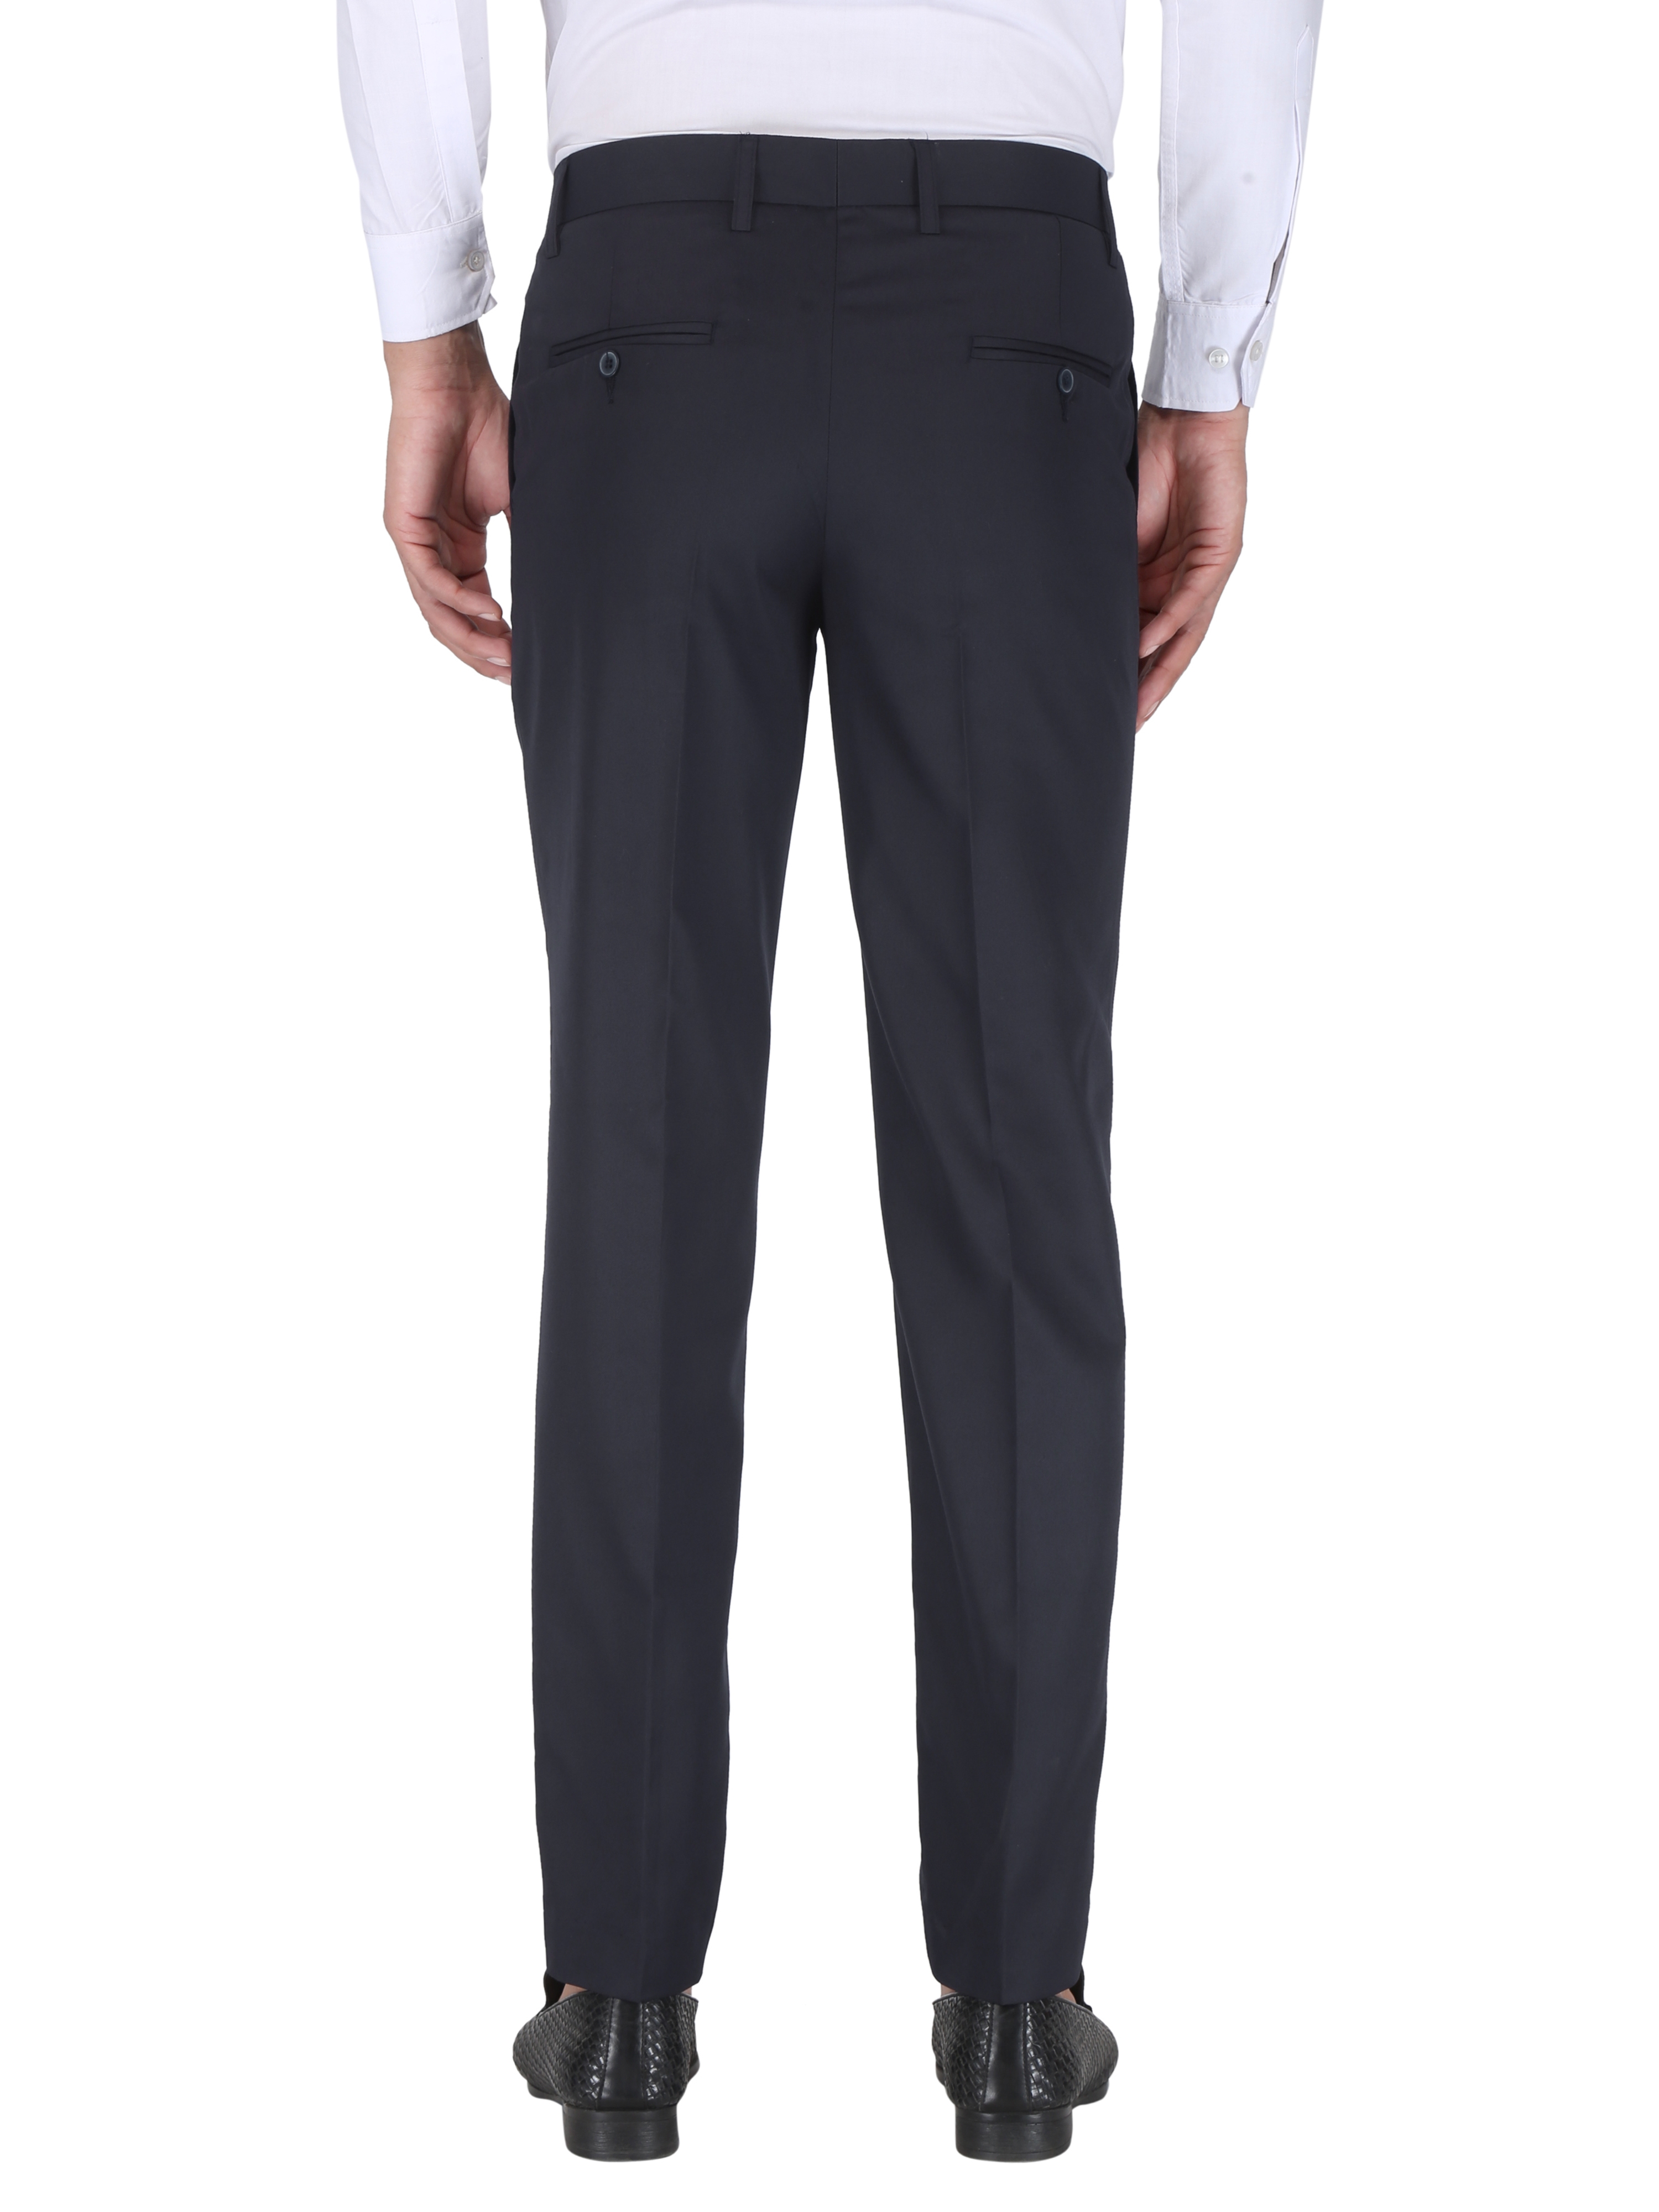 Buy SHBM Formal Pants for Men | Men's Regular fit Formal Pant Combo | Non  Stretchable Trouser | Office wear Trousers - Black-Black_38 at Amazon.in